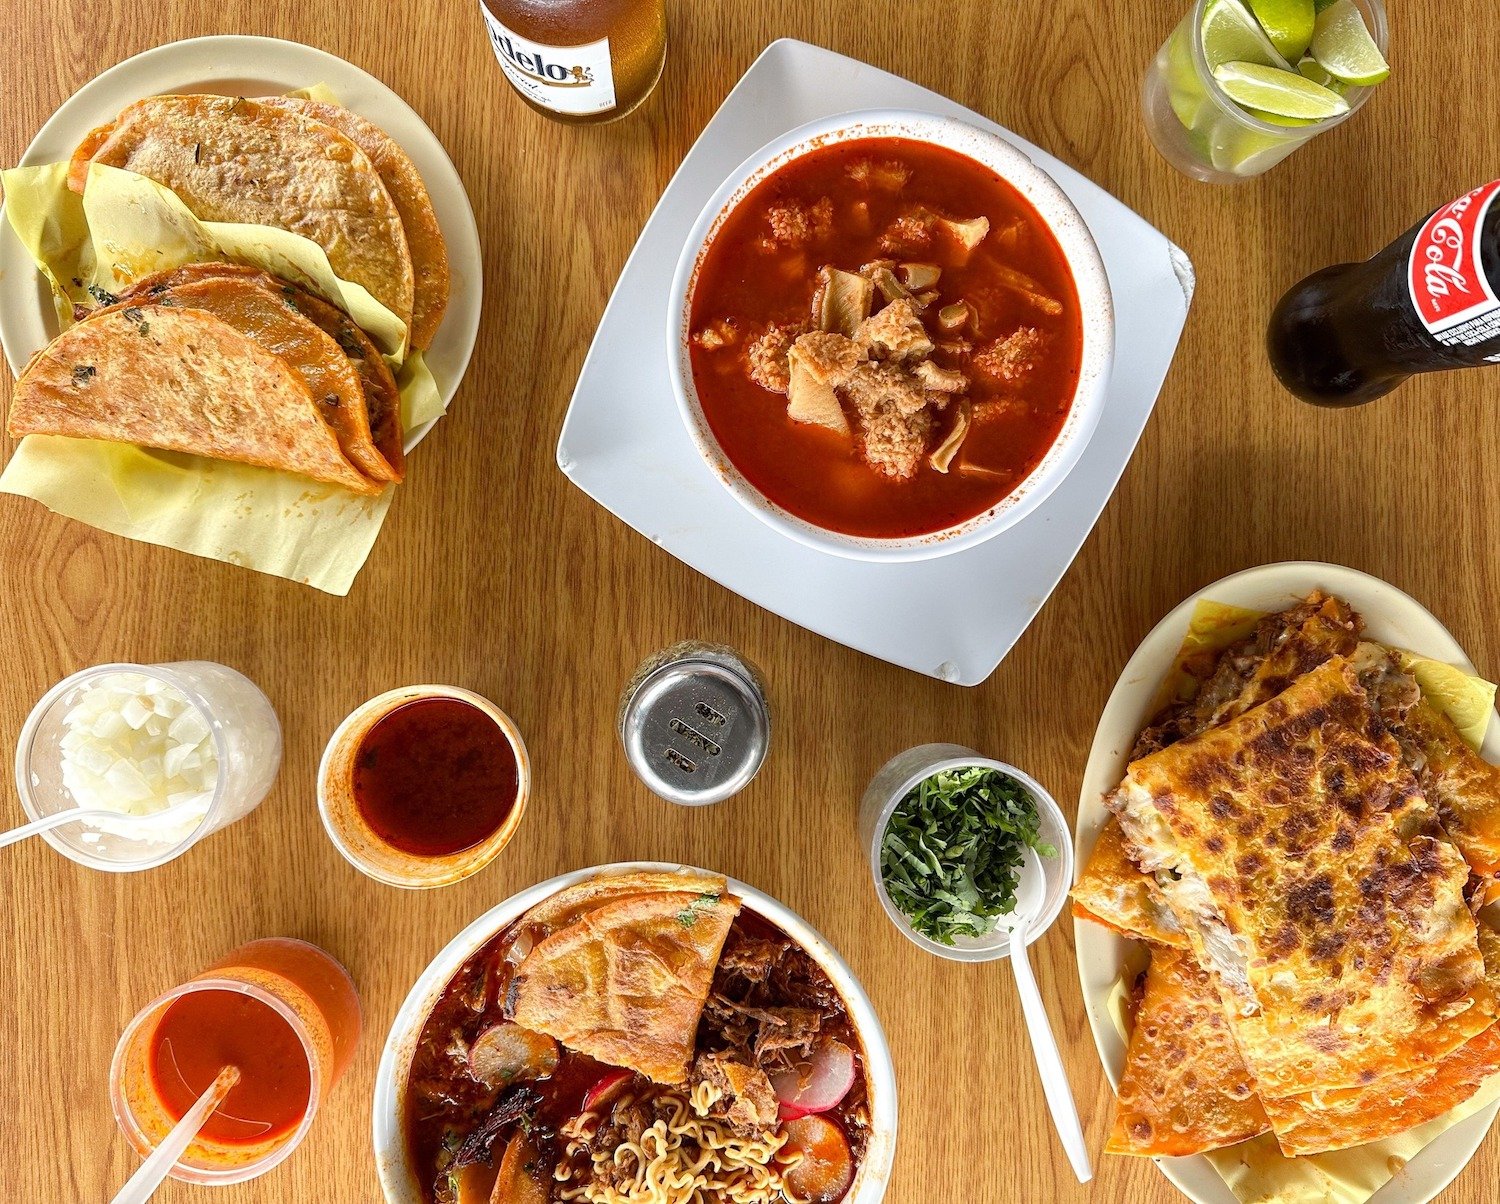 Food dishes and drinks from San Diego Mexican restaurant Don Vargas Birrieria y Mariscos